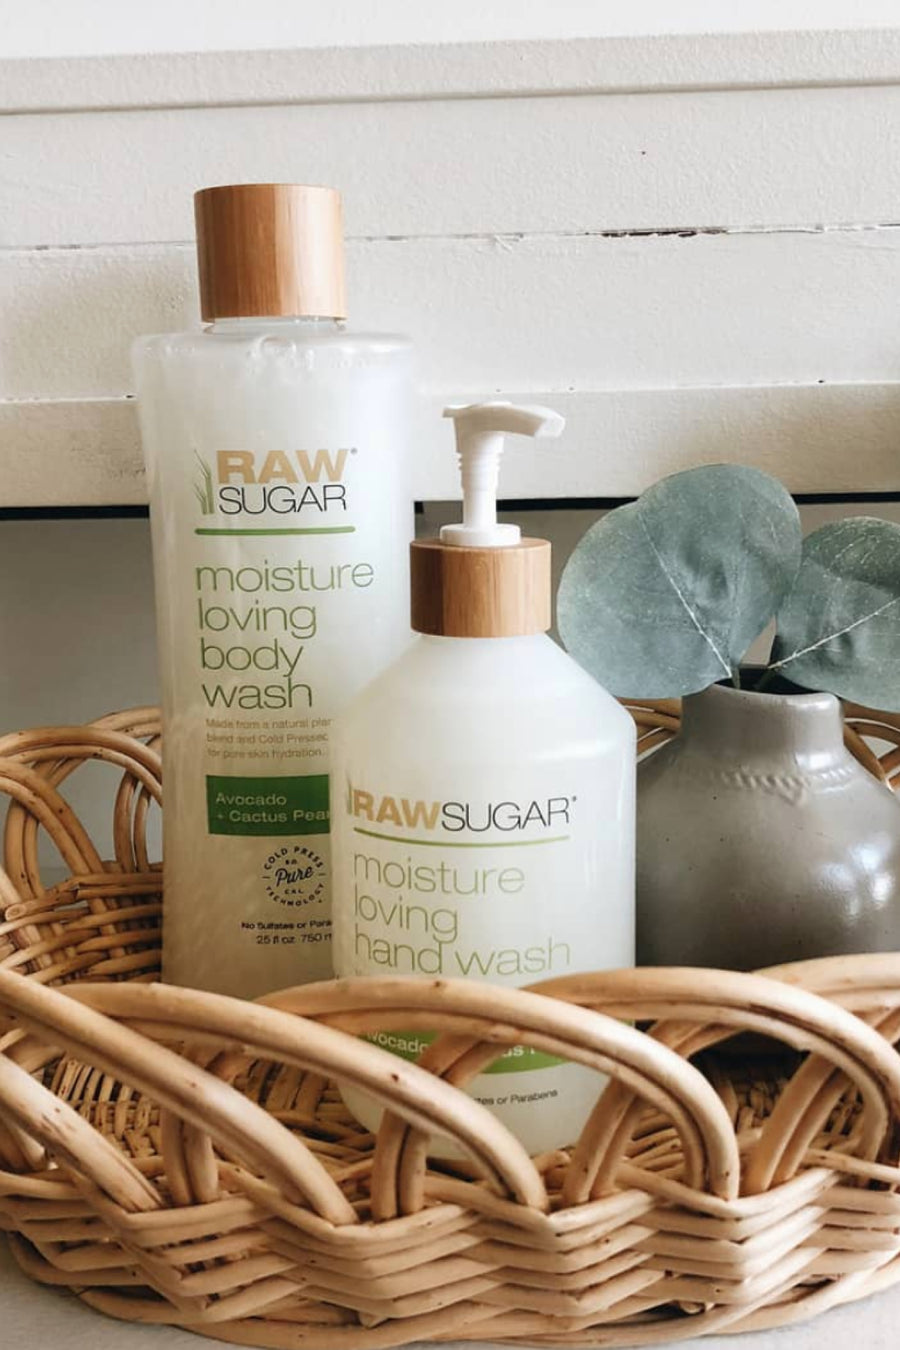 body wash and hand wash in basket